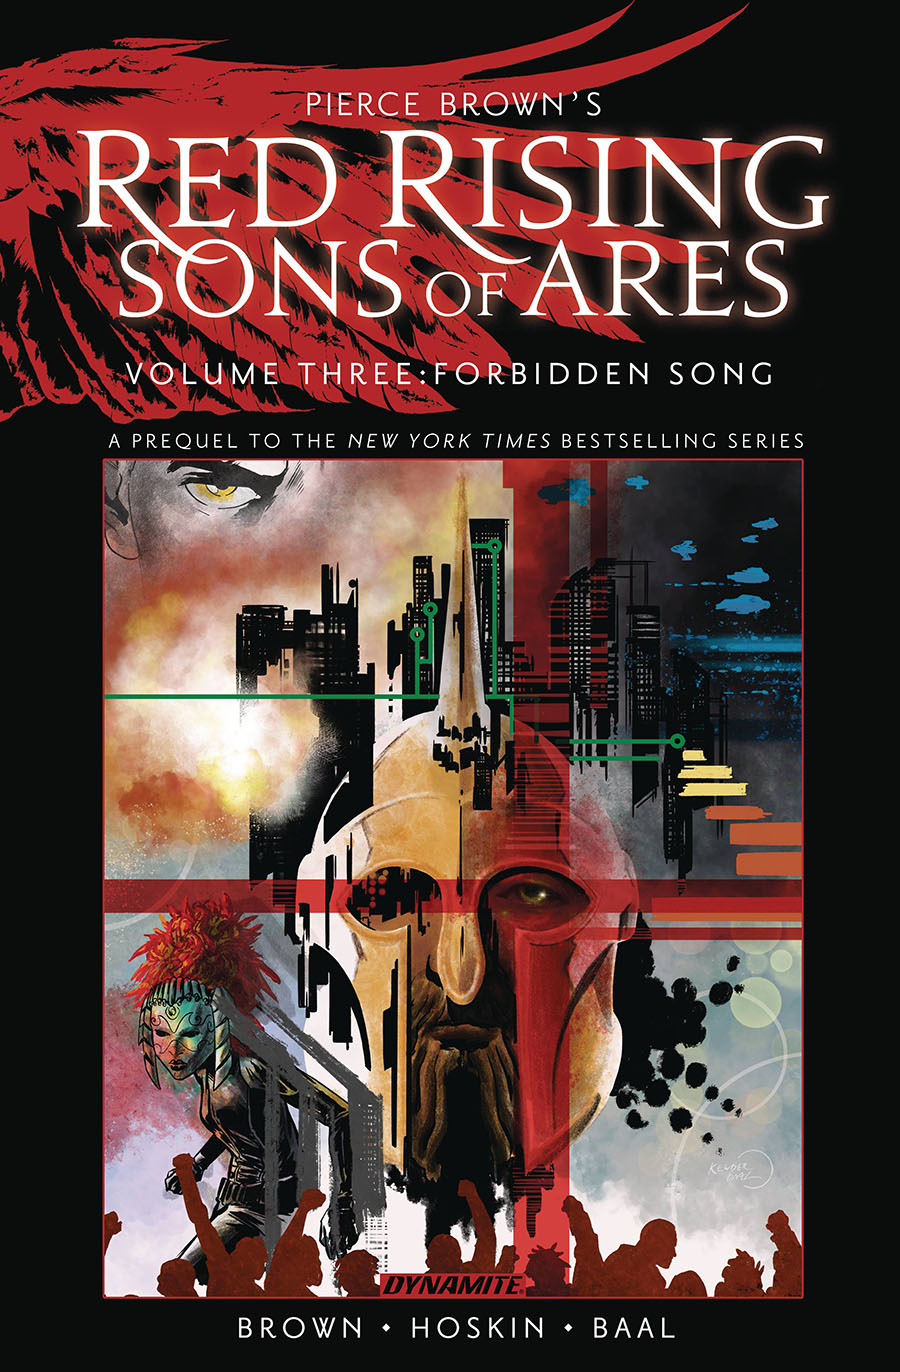 Pierce Browns Red Rising Sons Of Ares Vol 3 Forbidden Song HC Regular Edition